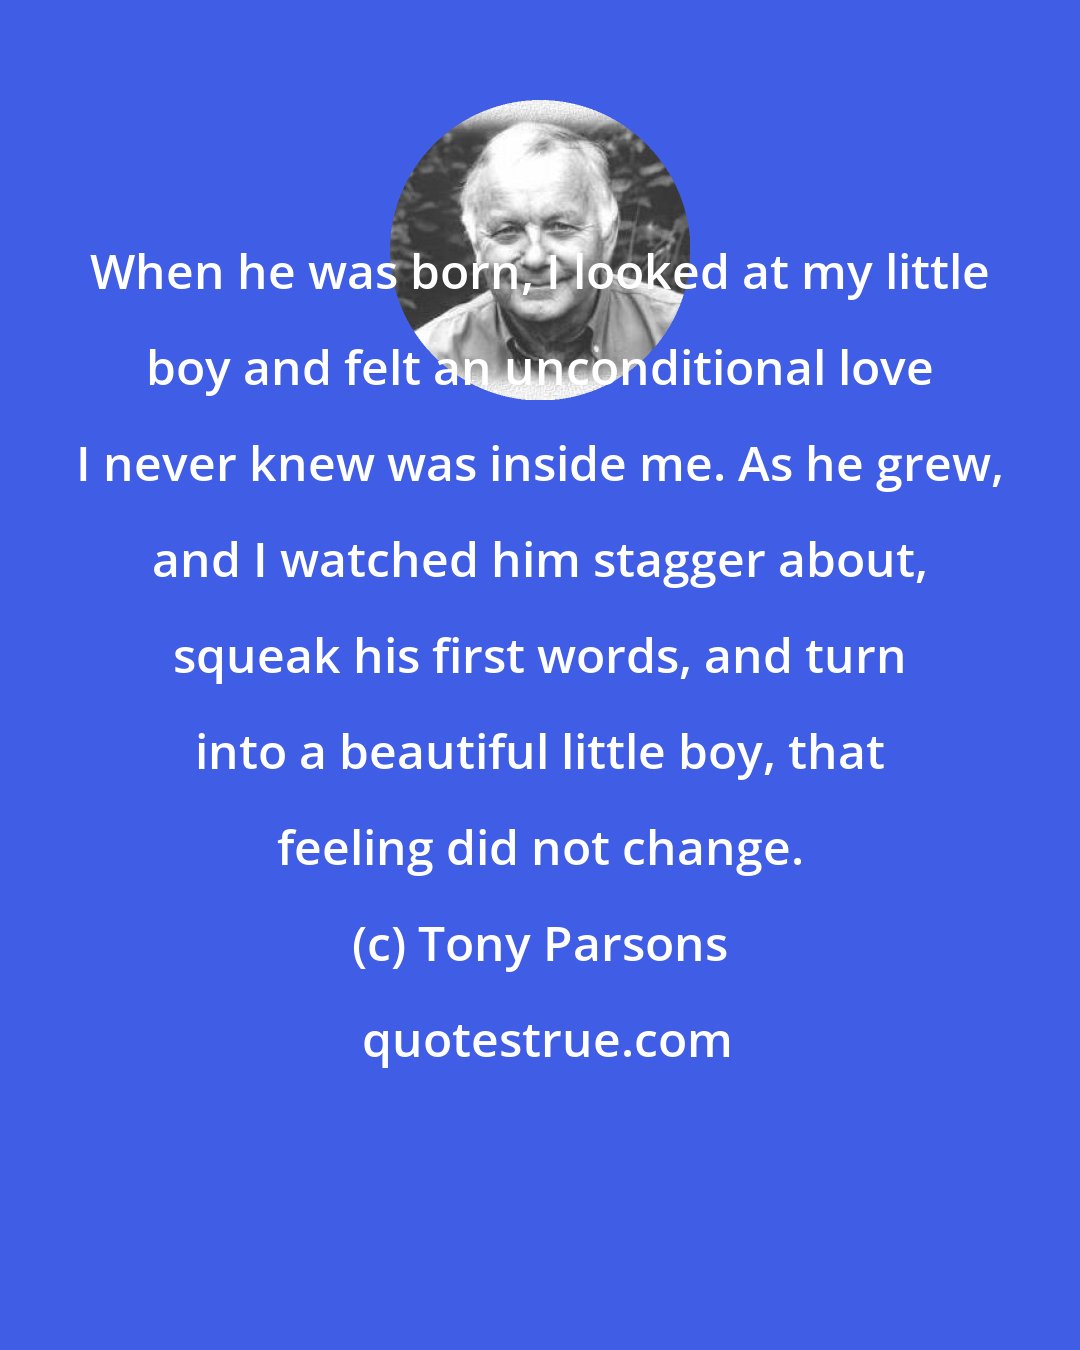 Tony Parsons: When he was born, I looked at my little boy and felt an unconditional love I never knew was inside me. As he grew, and I watched him stagger about, squeak his first words, and turn into a beautiful little boy, that feeling did not change.